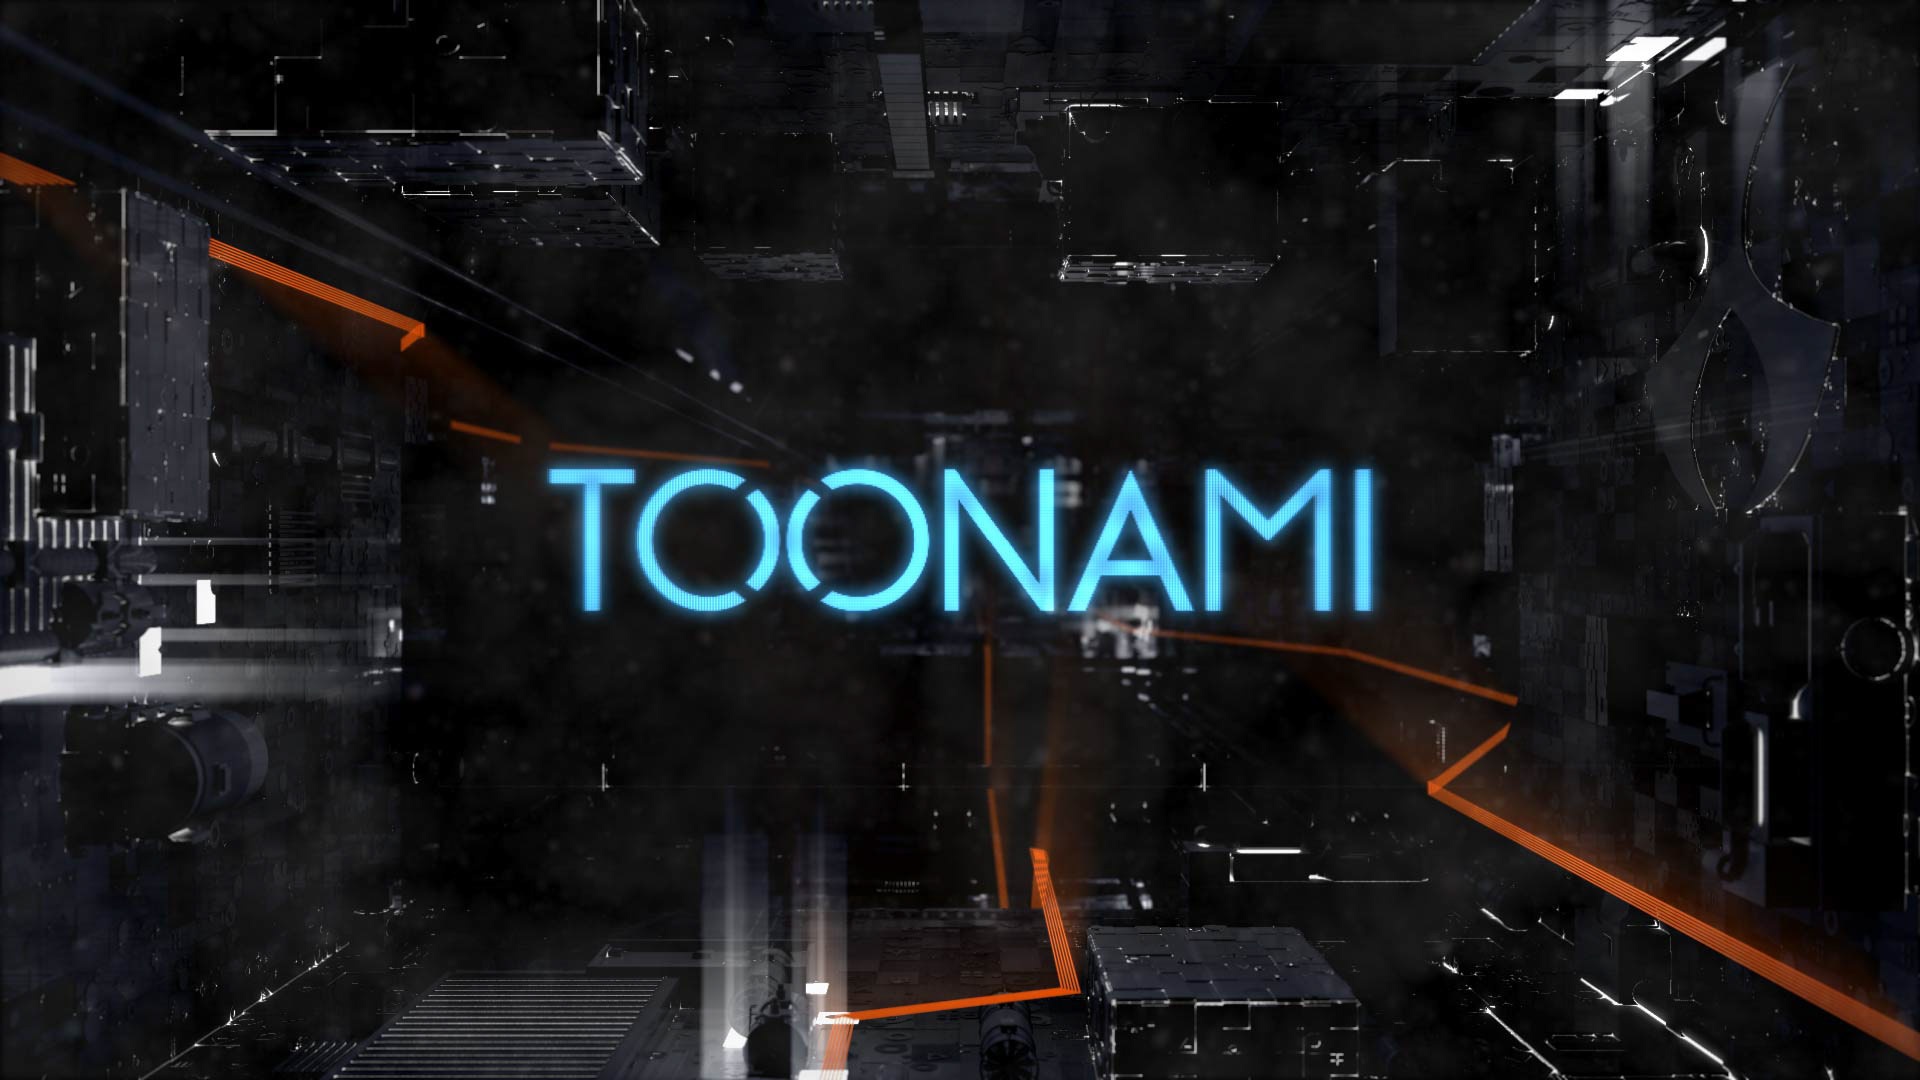 Toonami Faithful – Here is What’s on the Schedule for Saturday